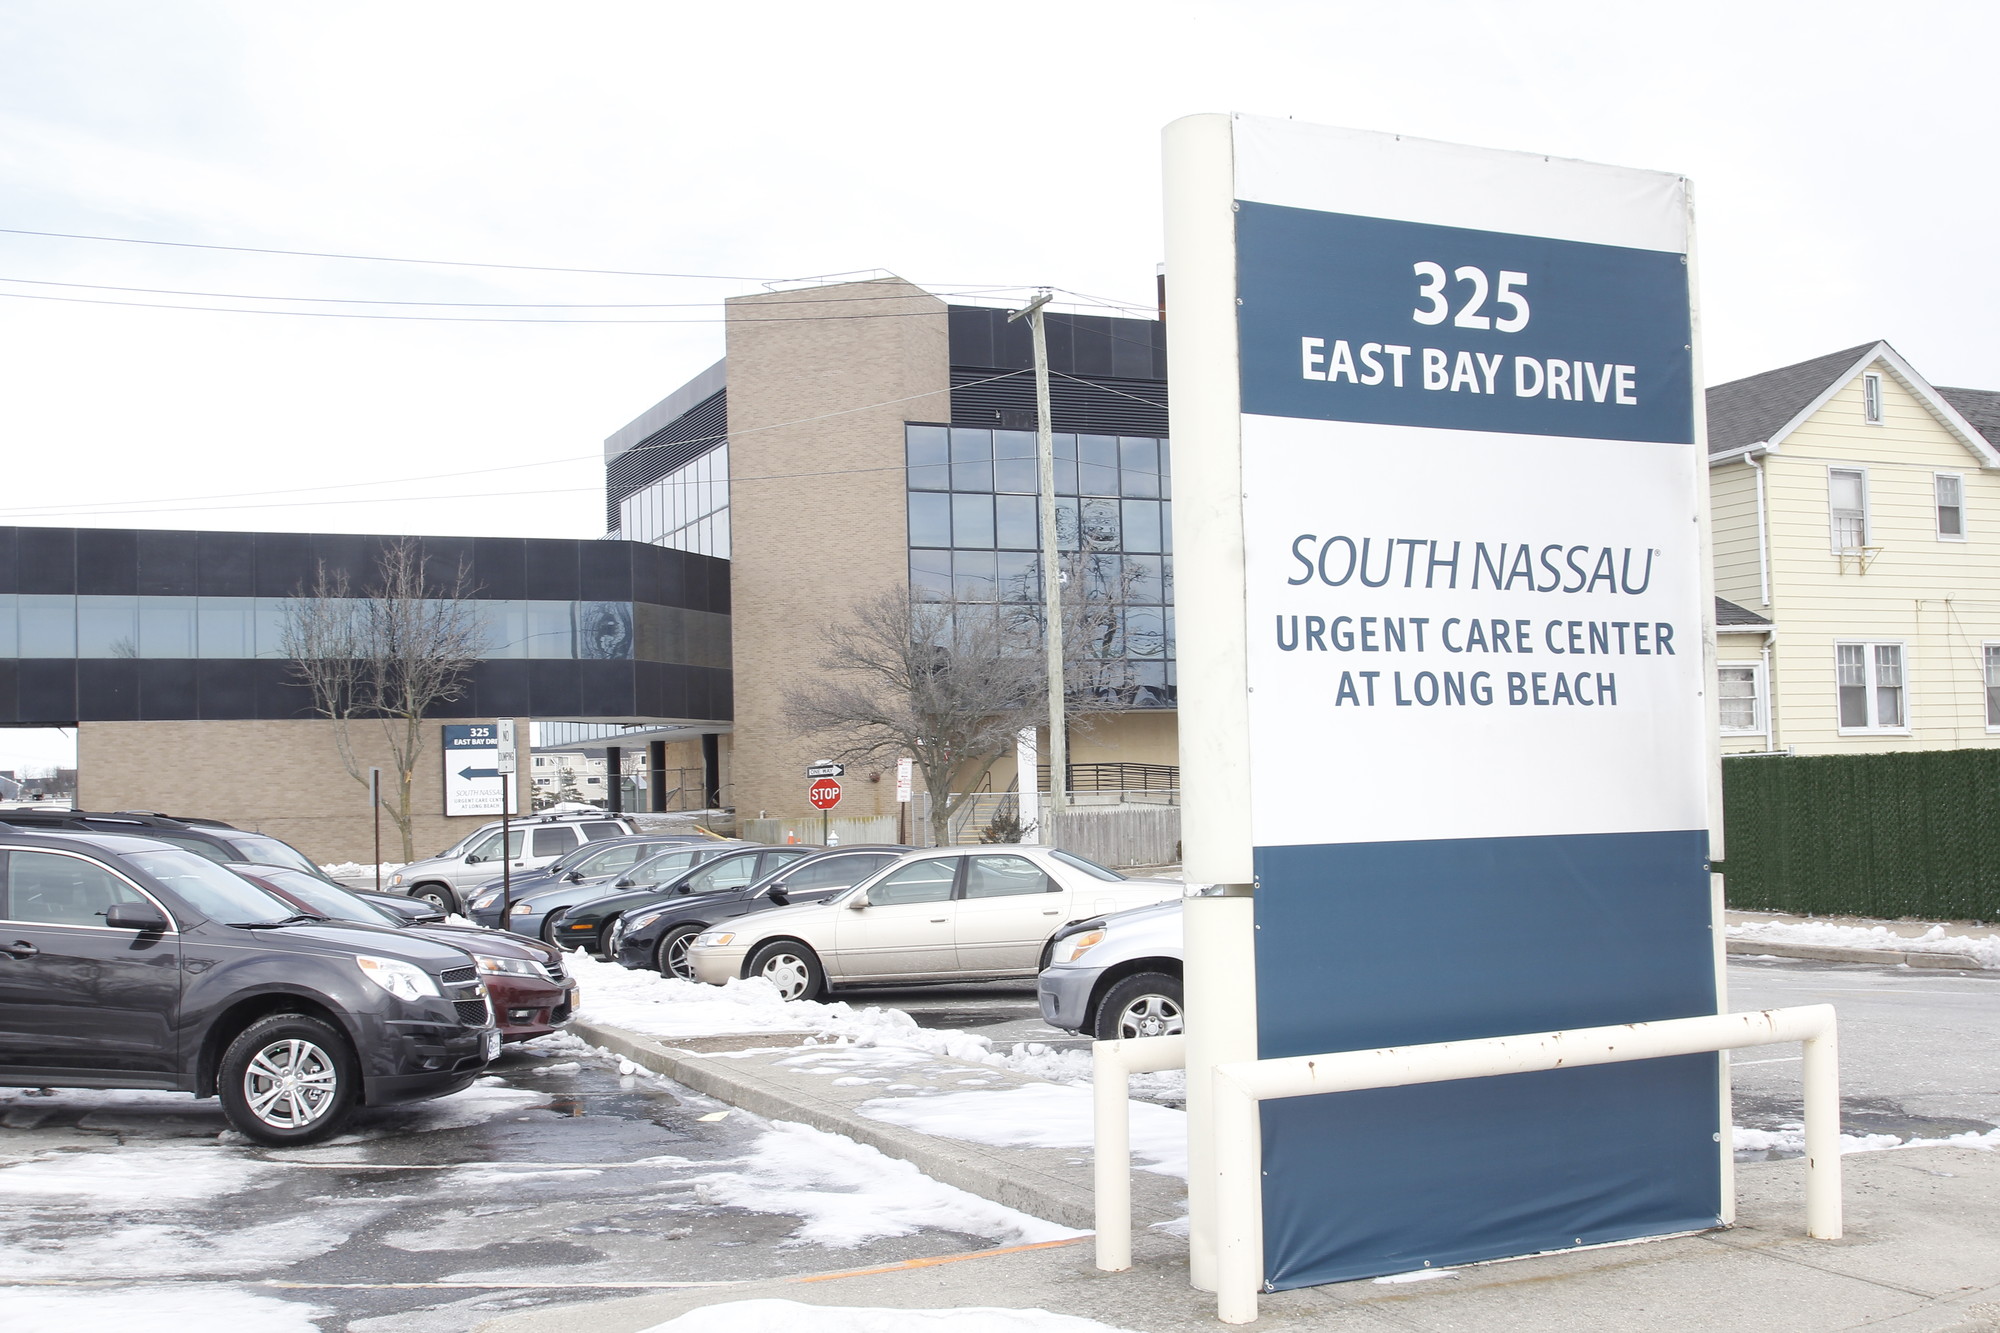 Kaminsky and the City Council will host a public forum with representatives from the state Health Department and South Nassau Communities Hospital on Monday at 7 p.m.